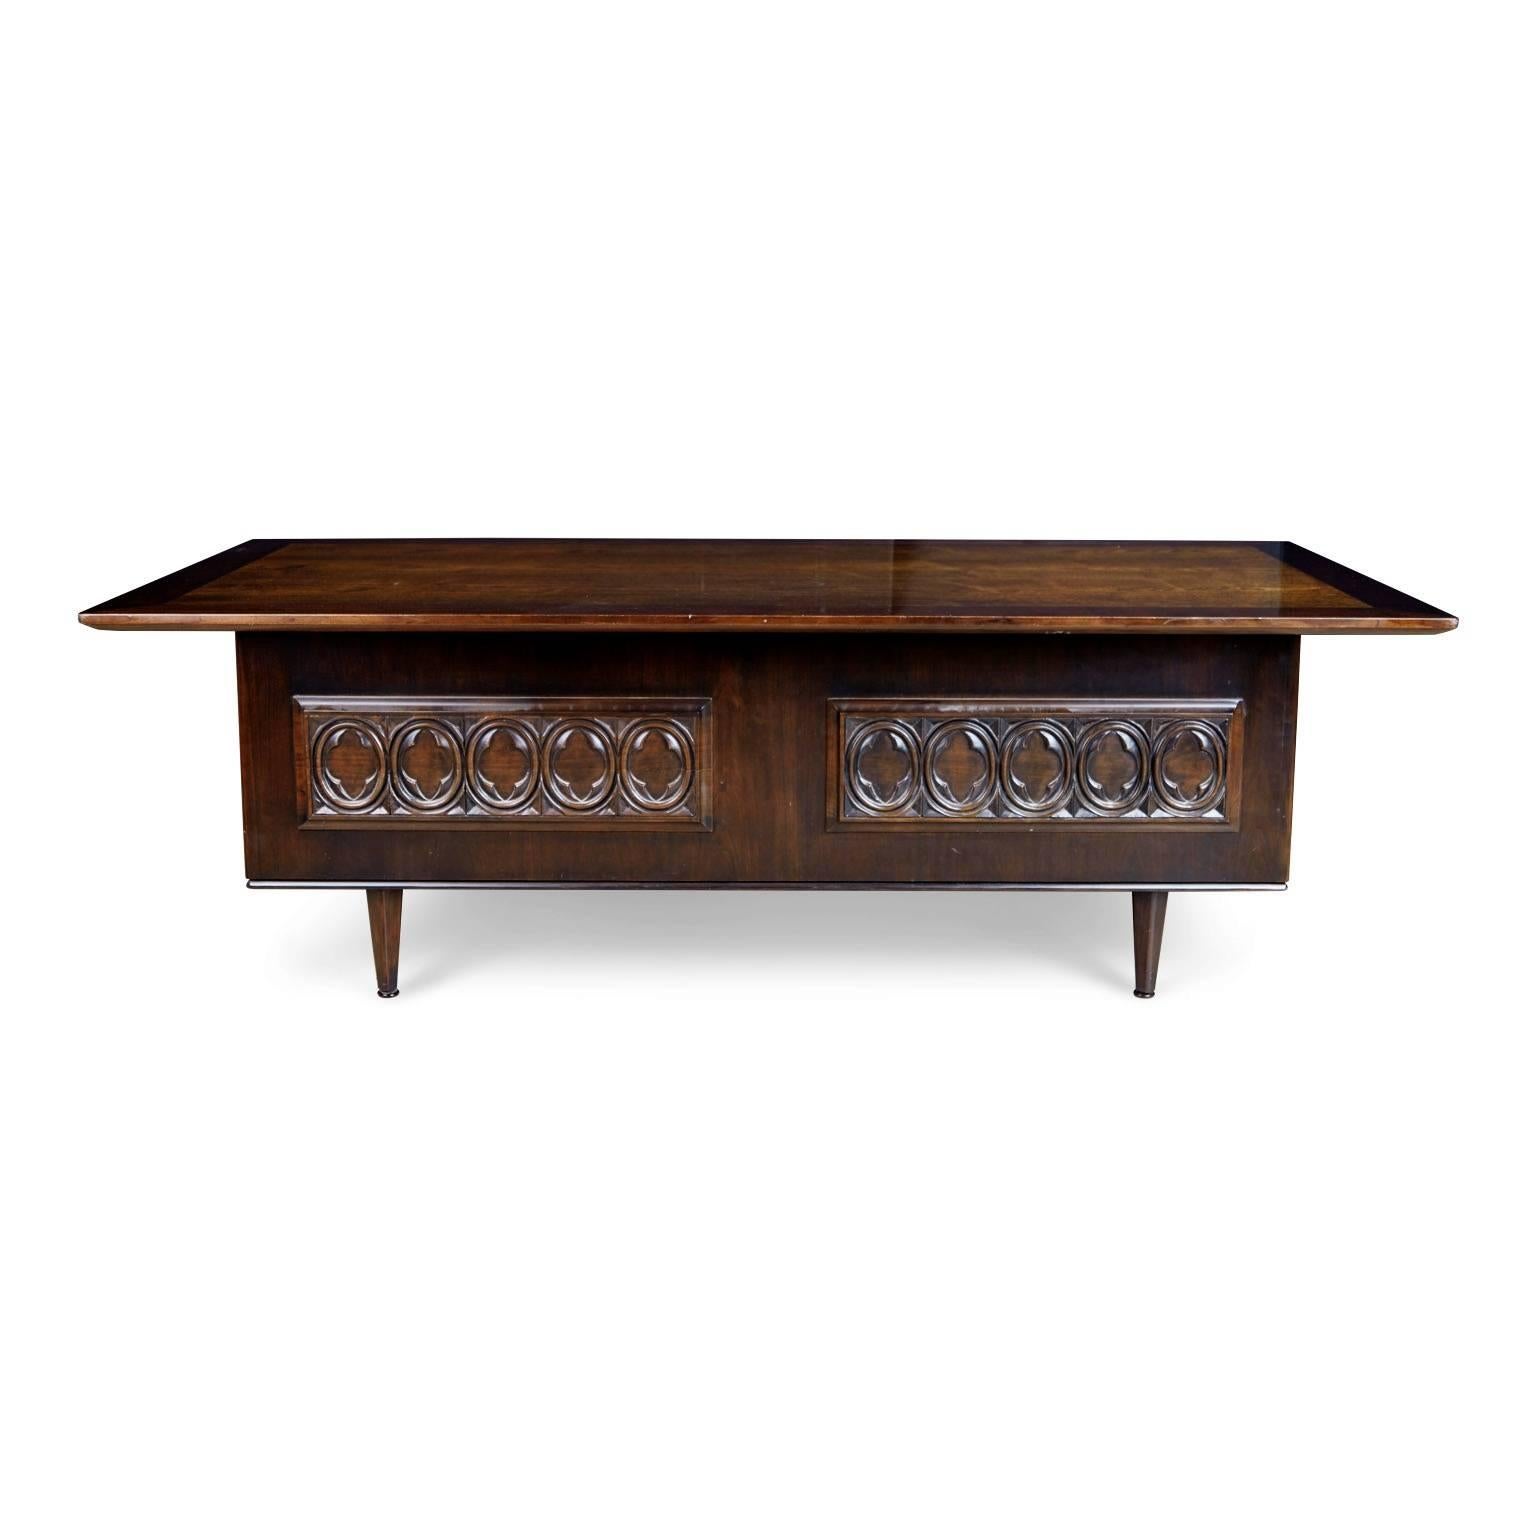 Monteverdi-Young were renown for their application of the Italian modernist movement in their designs and pairing this with old-fashioned craftsmanship, both of which these notions are evident in this expansive executive desk. The desk has three